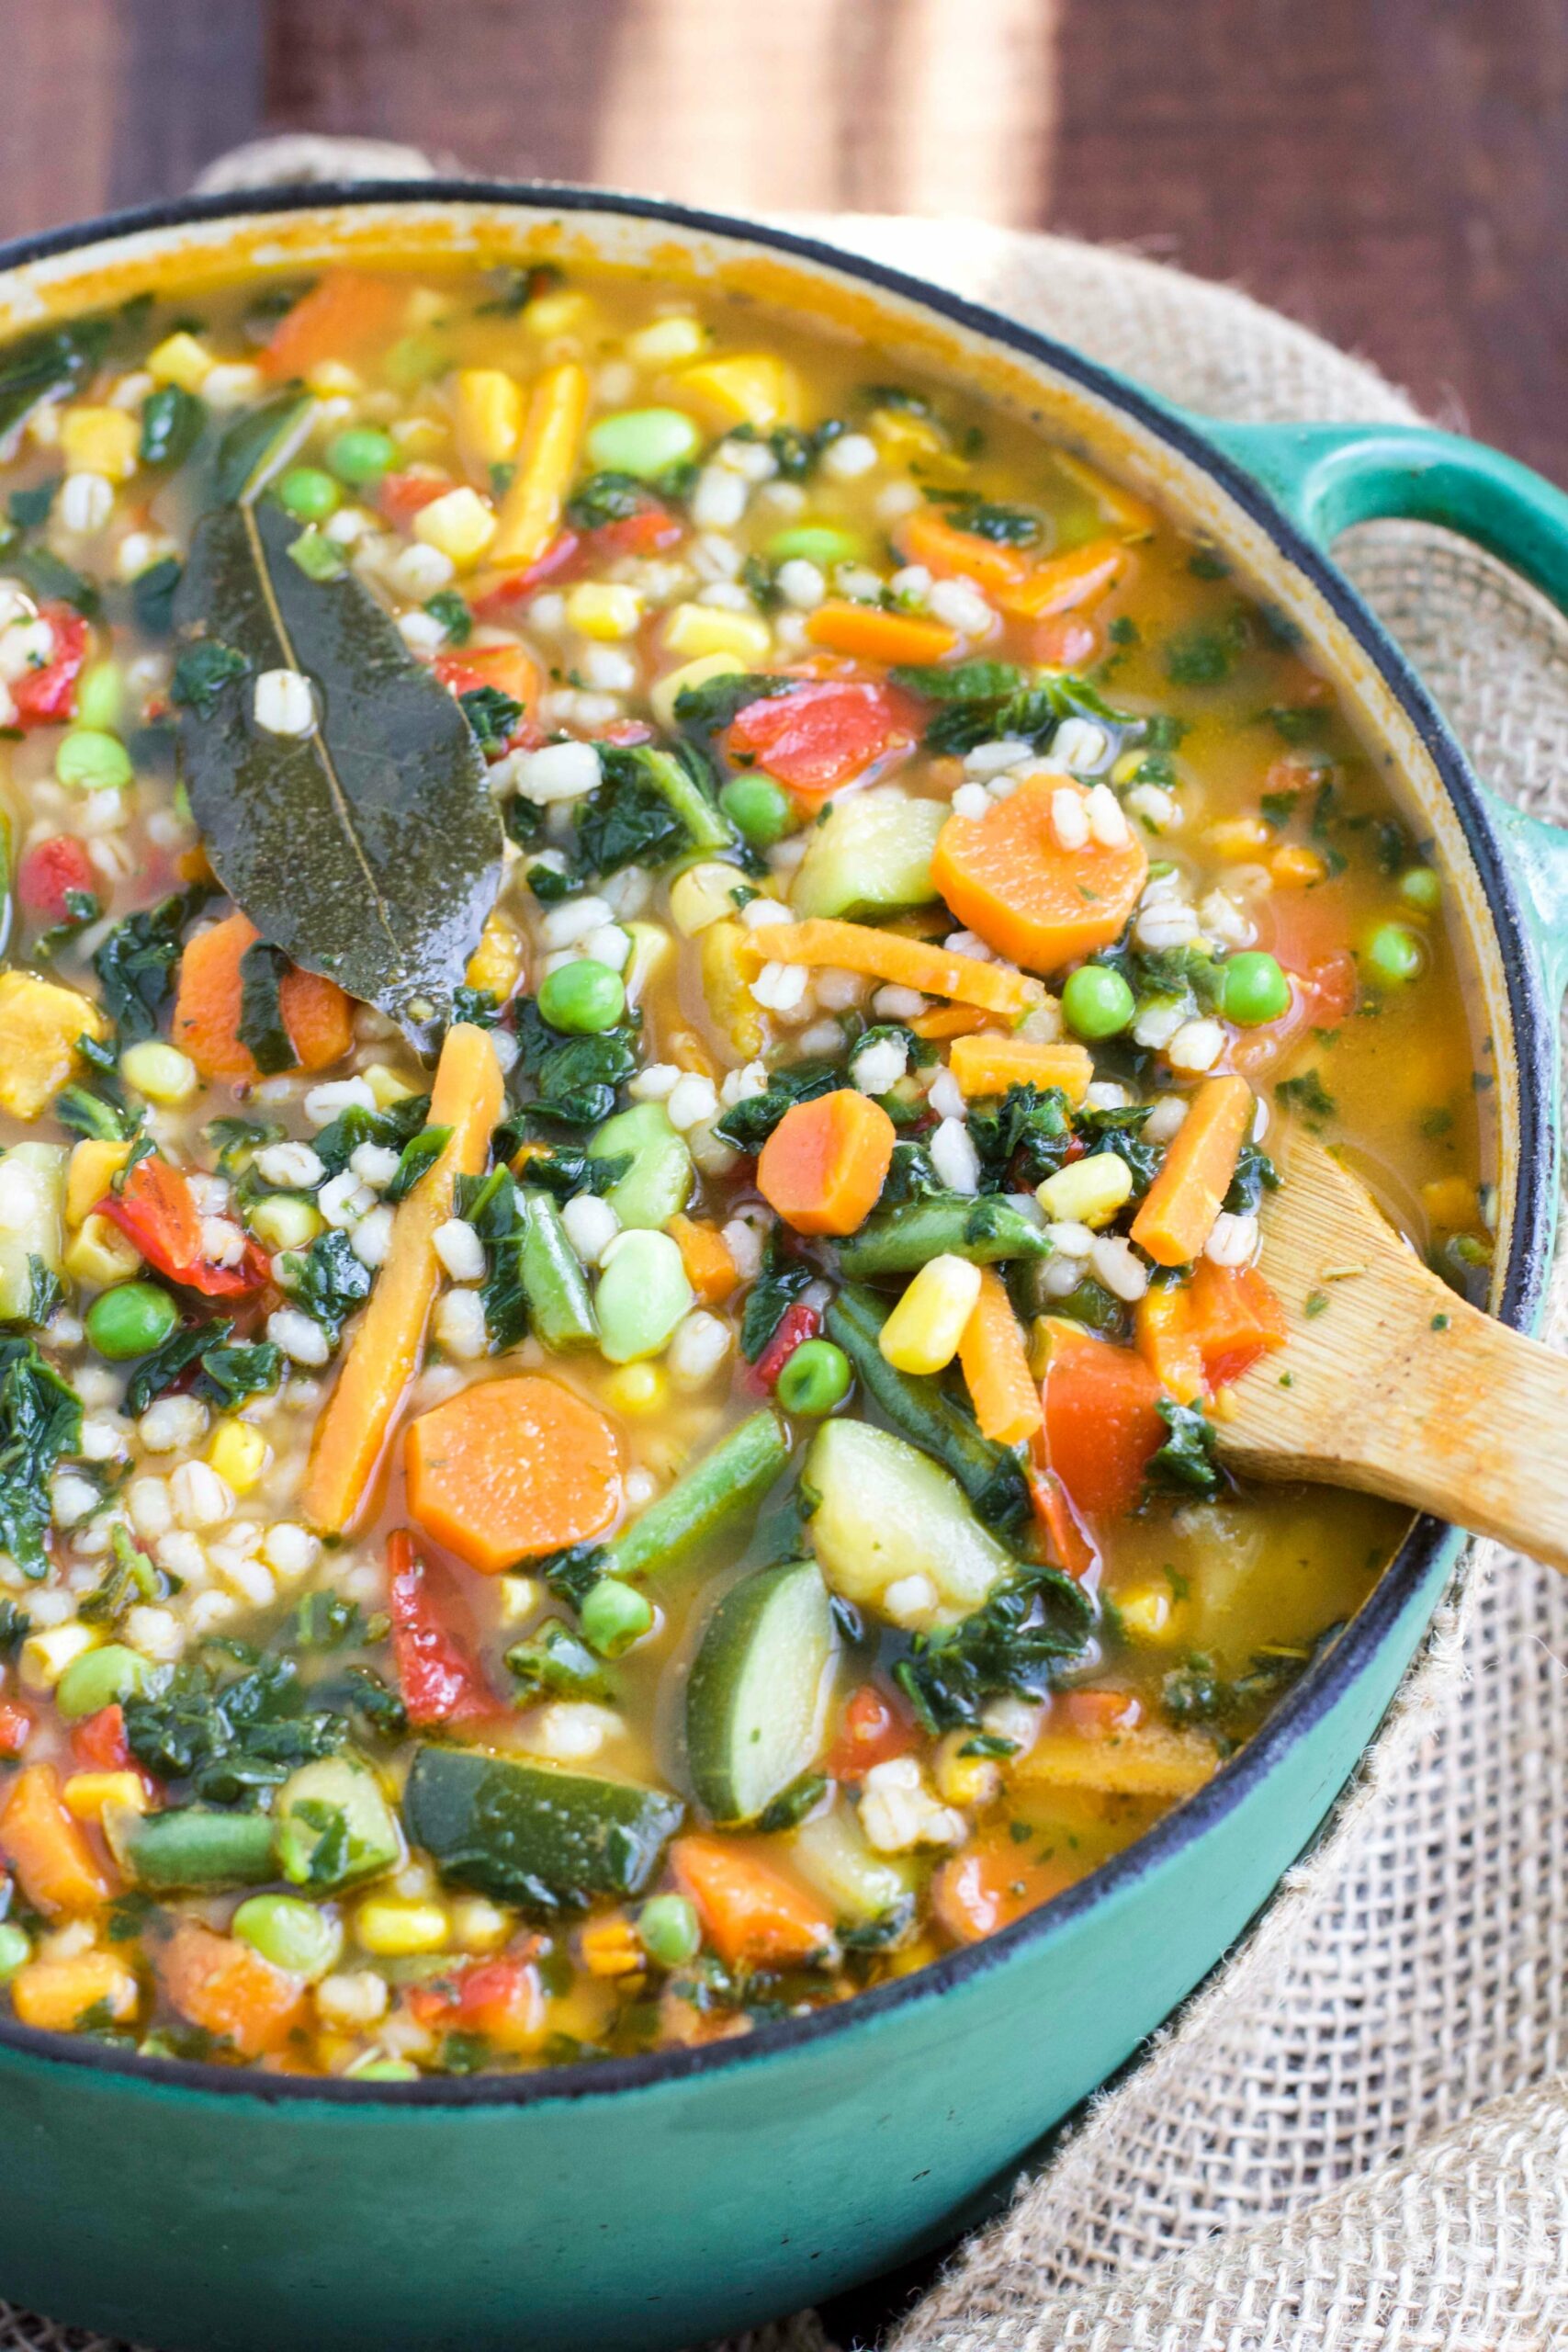 Vegan Quick Garden Veggie Soup // Everything good that a garden could give you - in a bowl. You can have 3 servings of this for lunch and call it a day. It's comforting and filling, so you won't be hungry 'til dinner. | The Green Loot #vegan #cleaneating #weightloss